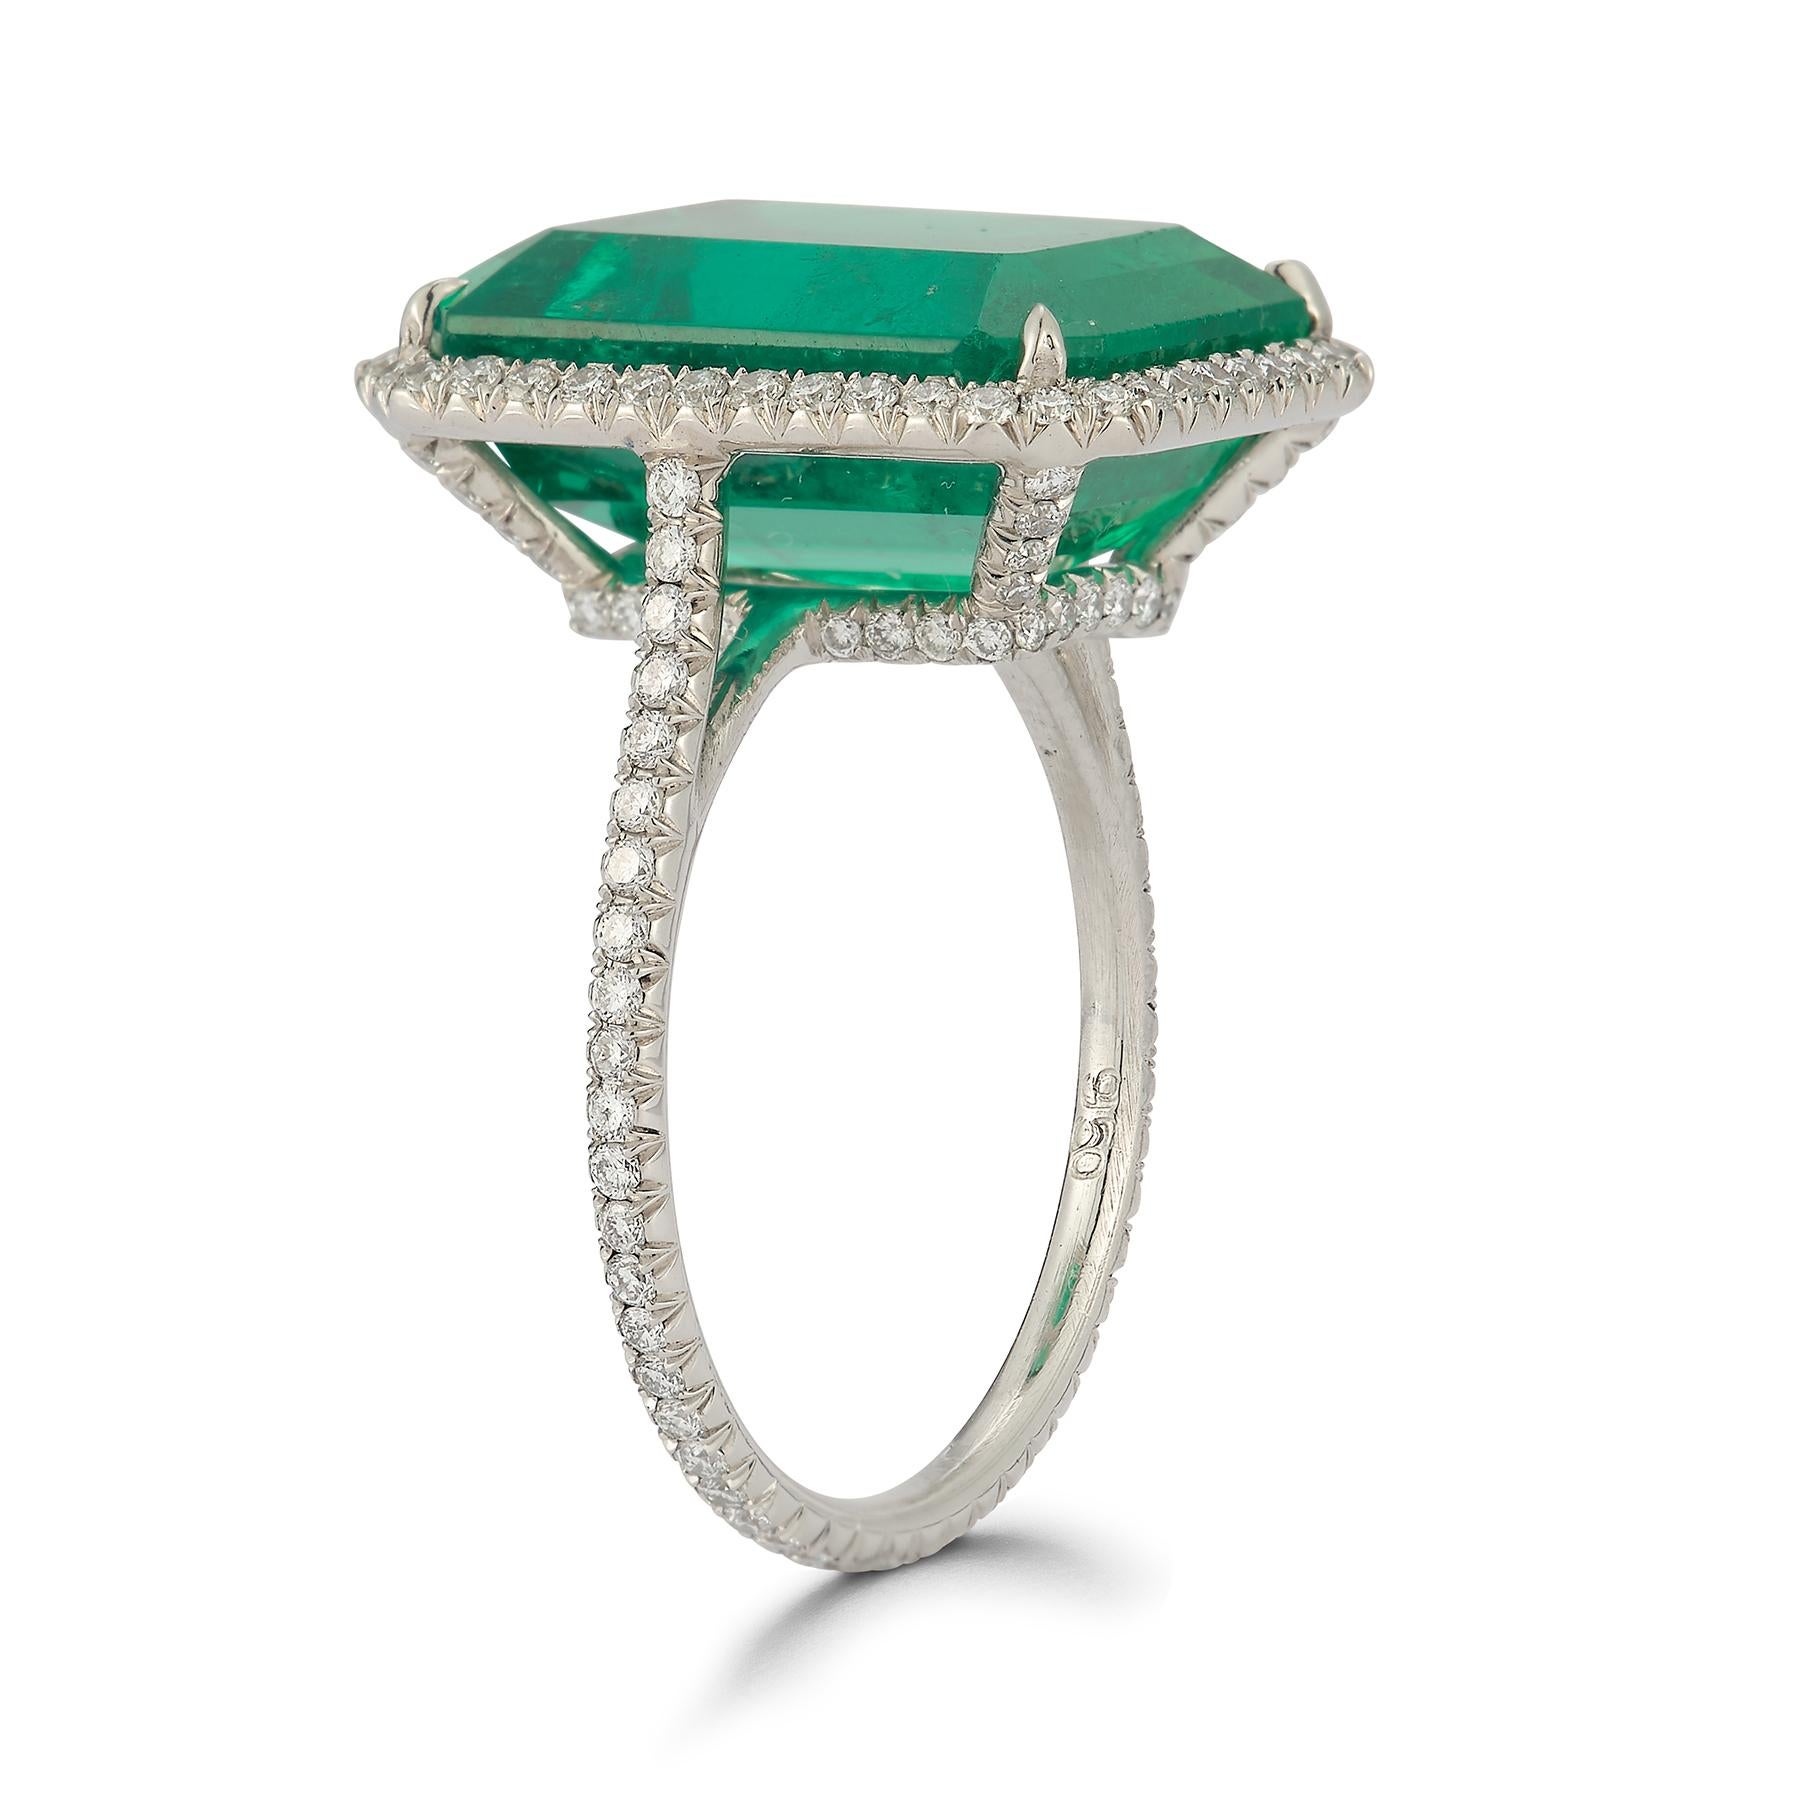 8.72 ct. Certified Colombian Emerald and Diamond Ring

Extremely fine quality 8.72 ct. Emerald certified by AGL laboratory as Colombian.

.65 ct. Diamonds

Ring Size: 5.75

Resizable 

Accompanied with AGL emerald certification 